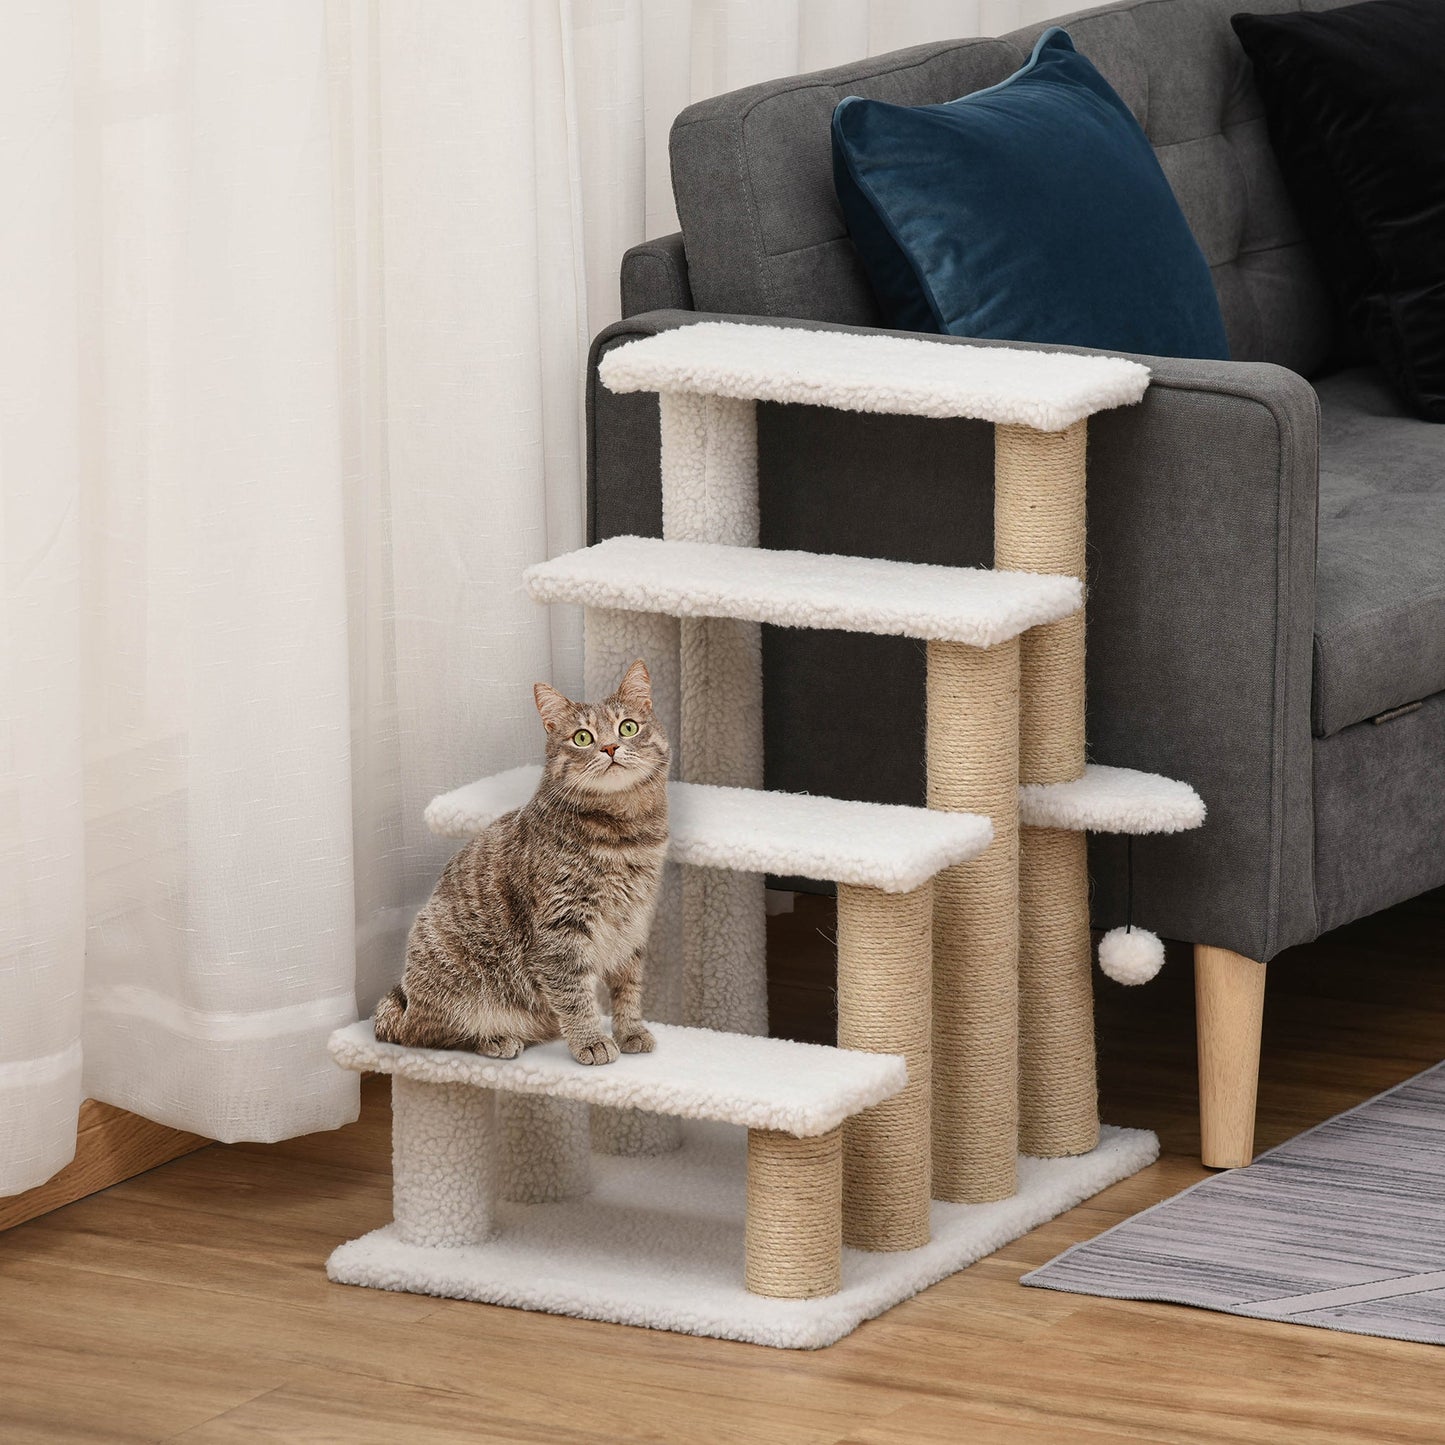 -PawHut 4-Level Pet Stairs, Cat Steps Carpeted Ladder Ramp, Kitten Tree Climber with Scratching Posts, Hanging Play Ball, for Bed, Sofa, White - Outdoor Style Company